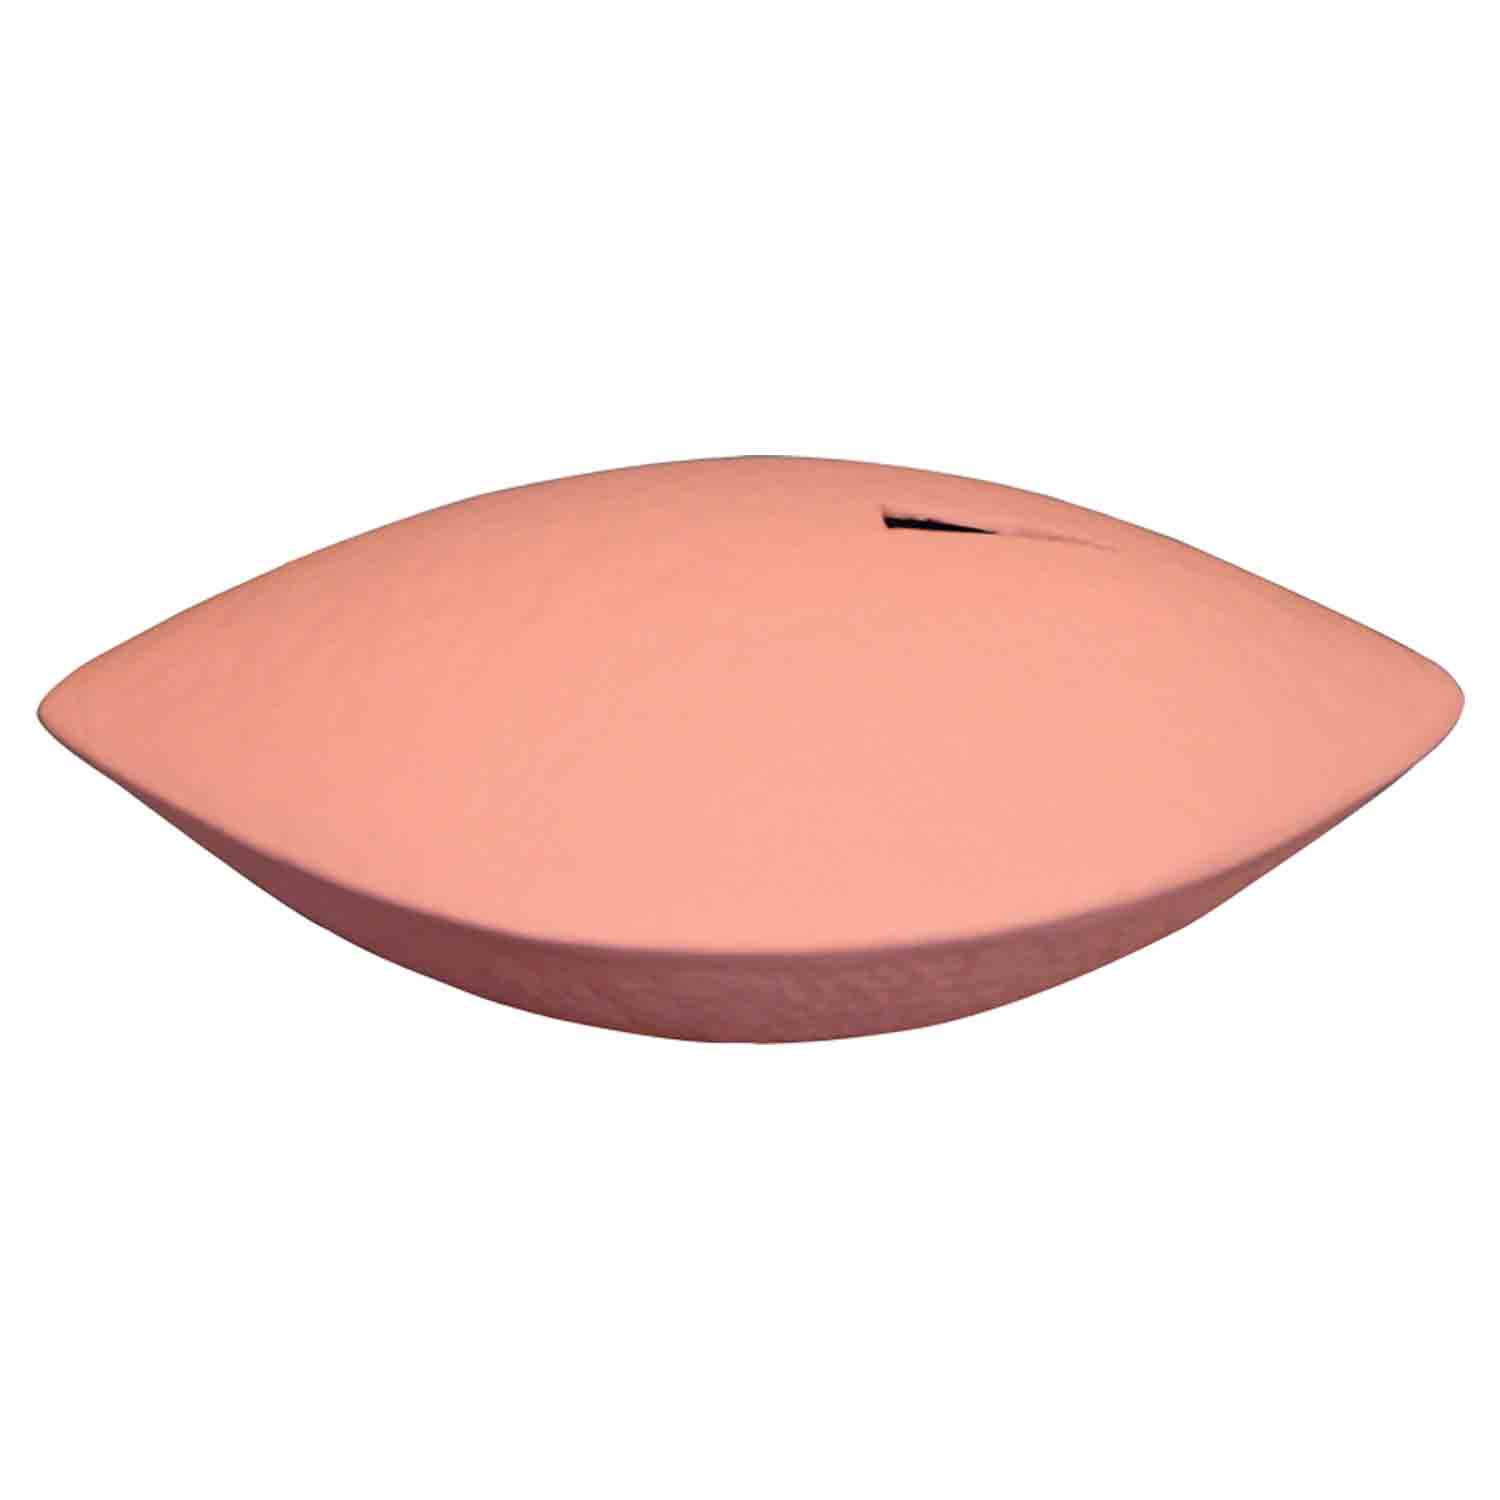 Memento Biodegradable Water Urn for Ashes in Coral Pink Side View